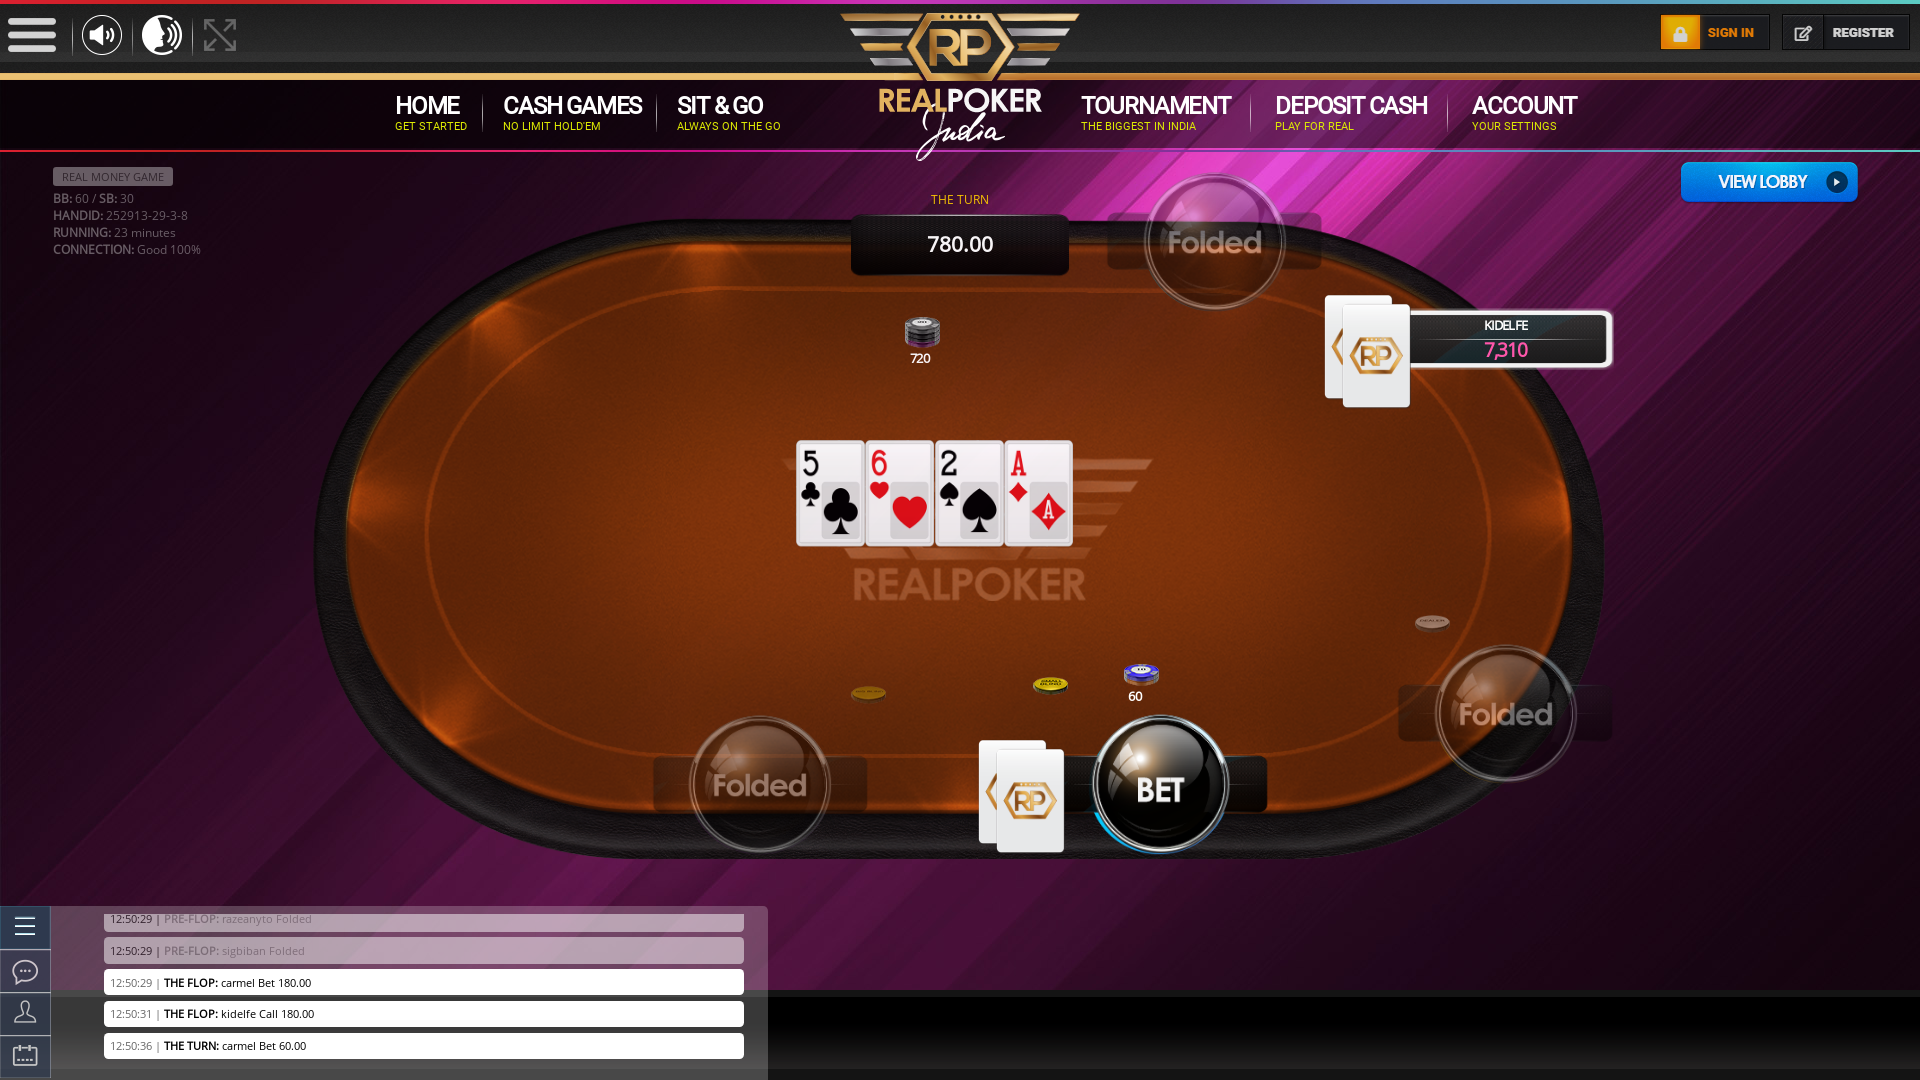 Real poker 10 player table in the 23rd minute